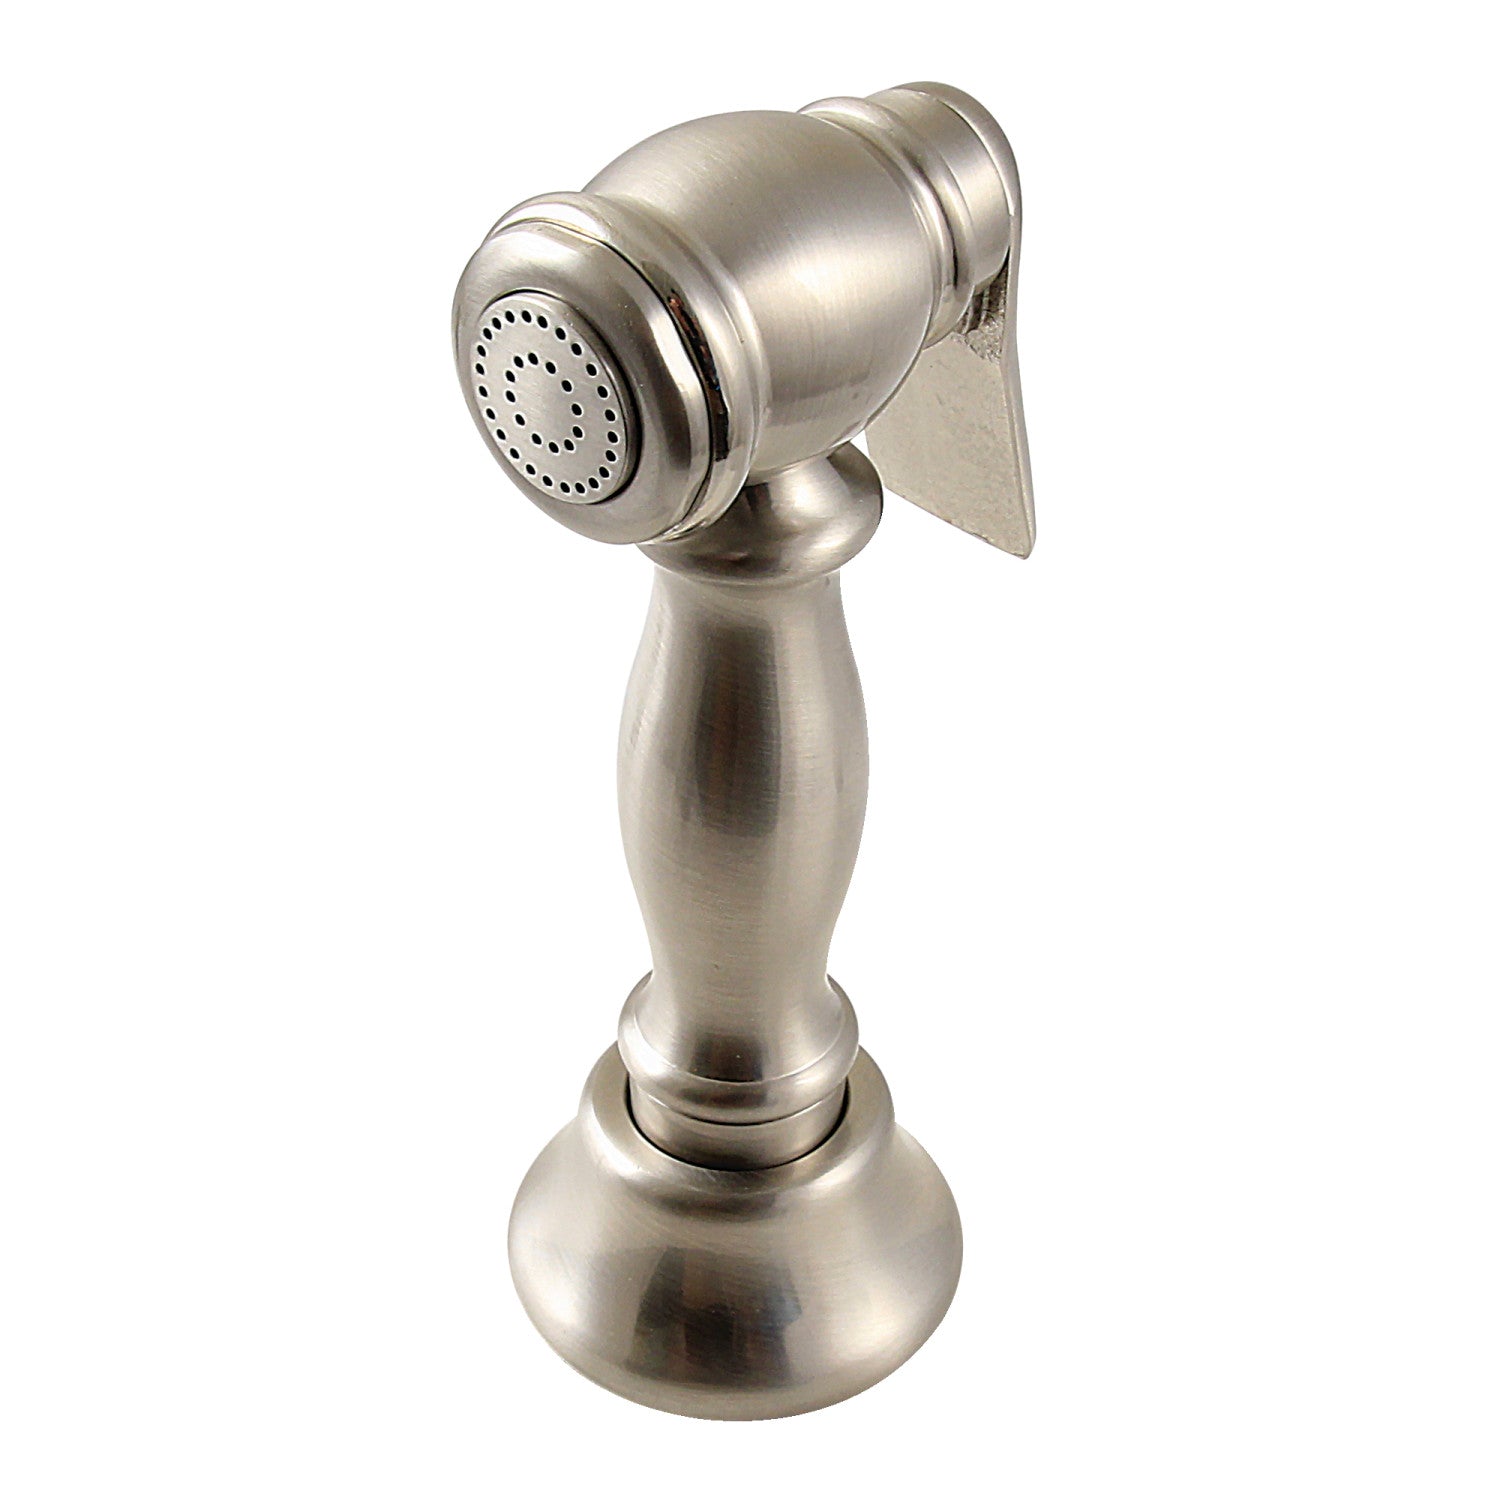 Newport Brass Kitchen Spout Assembly in Polished Nickel 2-284/15